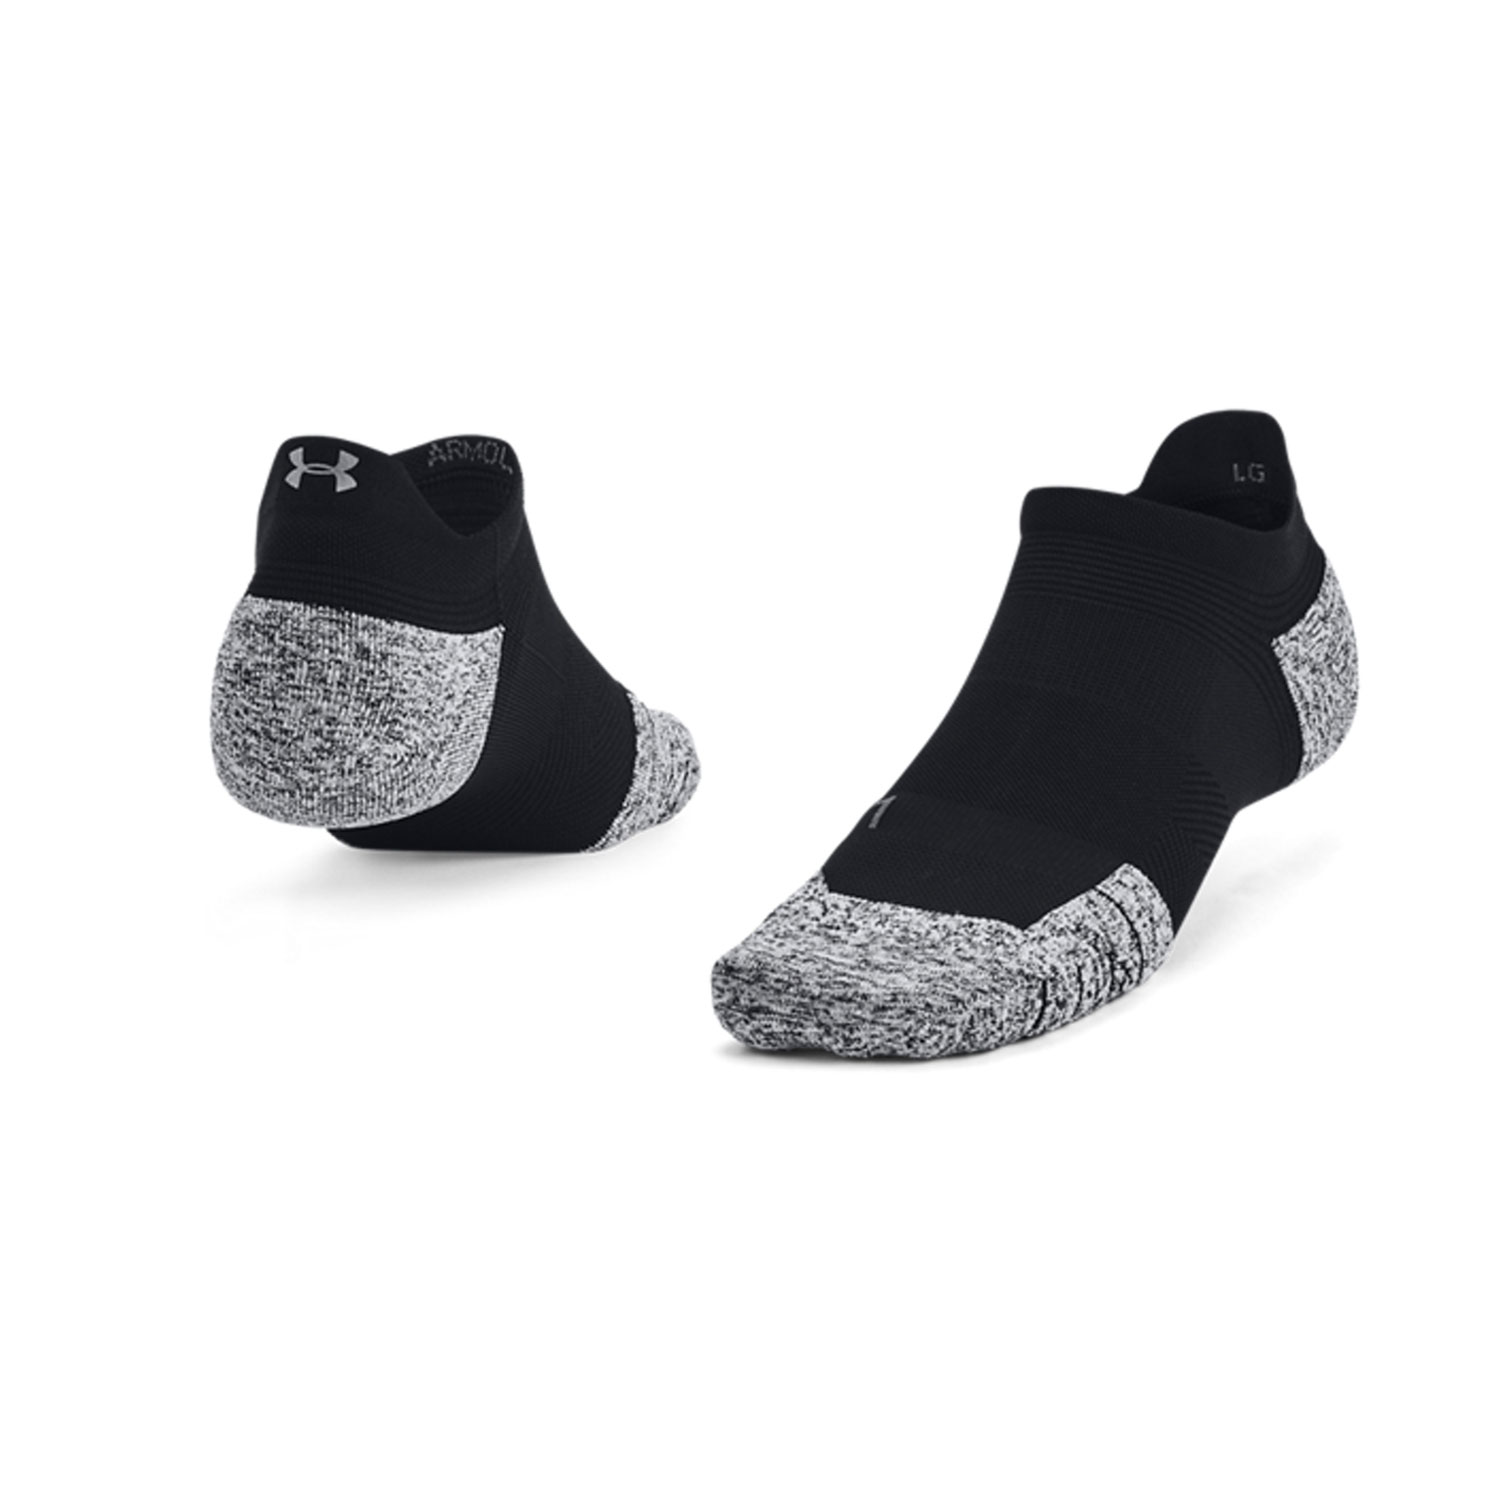 Under Armour ArmourDry Cushion Calcetines Running - Black/Gray